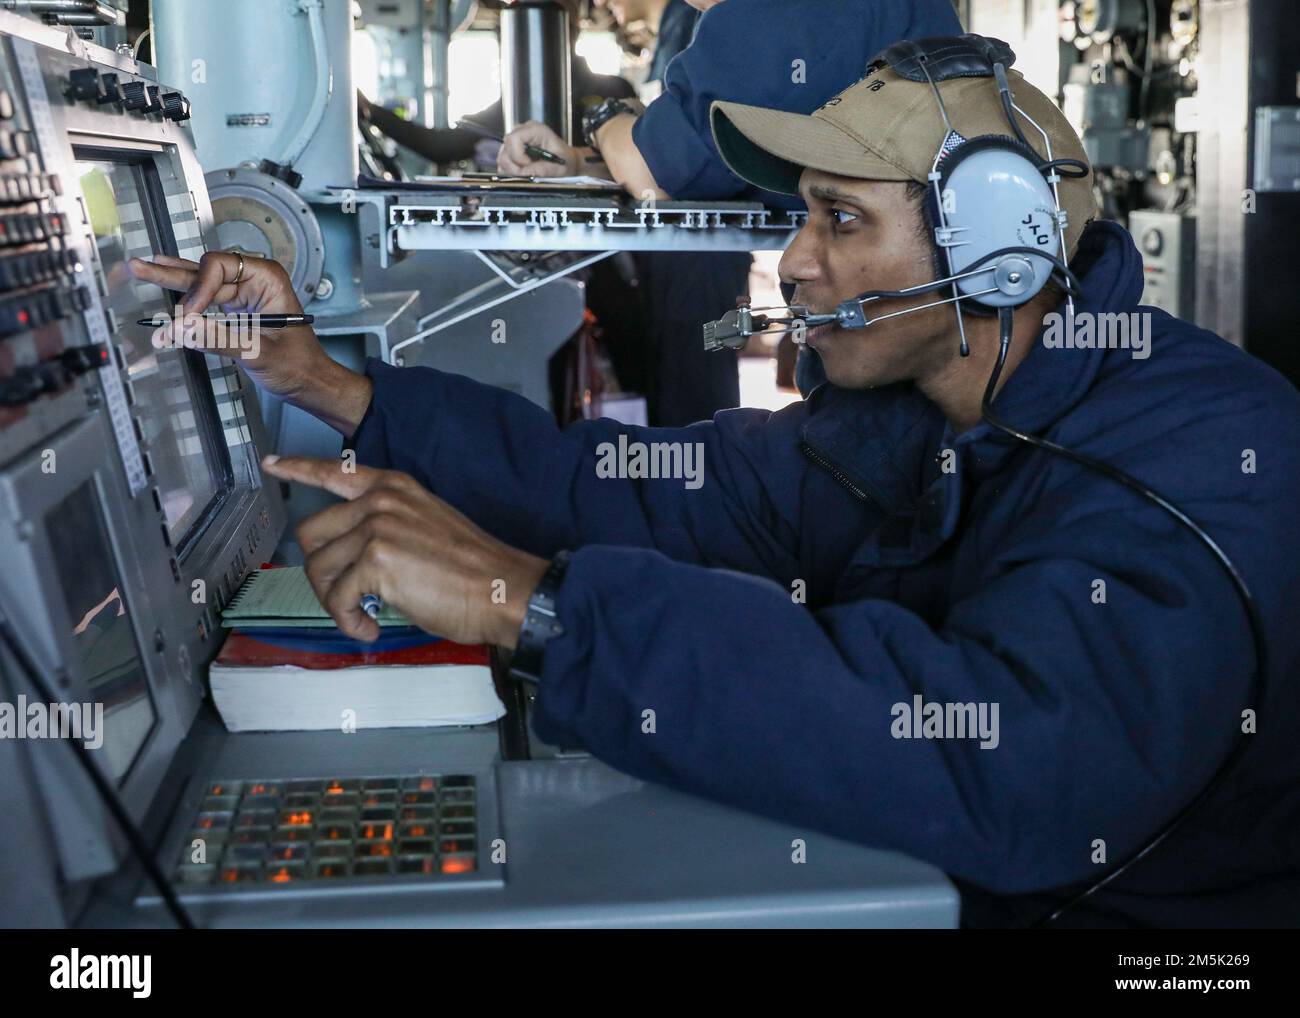 ATLANTIC OCEAN (March 21, 2022) –Lt. j.g. Nicholas Dortch mans a surface radar console in the pilot house aboard the Arleigh Burke-class guided-missile destroyer USS Porter (DDG 78), March 21. Porter, forward-deployed to Rota, Spain, is currently participating in Task Force Exercise in the U.S. 2nd Fleet area of operations. TFEX serves as the certification exercise for independent deploying ships and is designed to test mission readiness and performance in integrated operations. Stock Photo